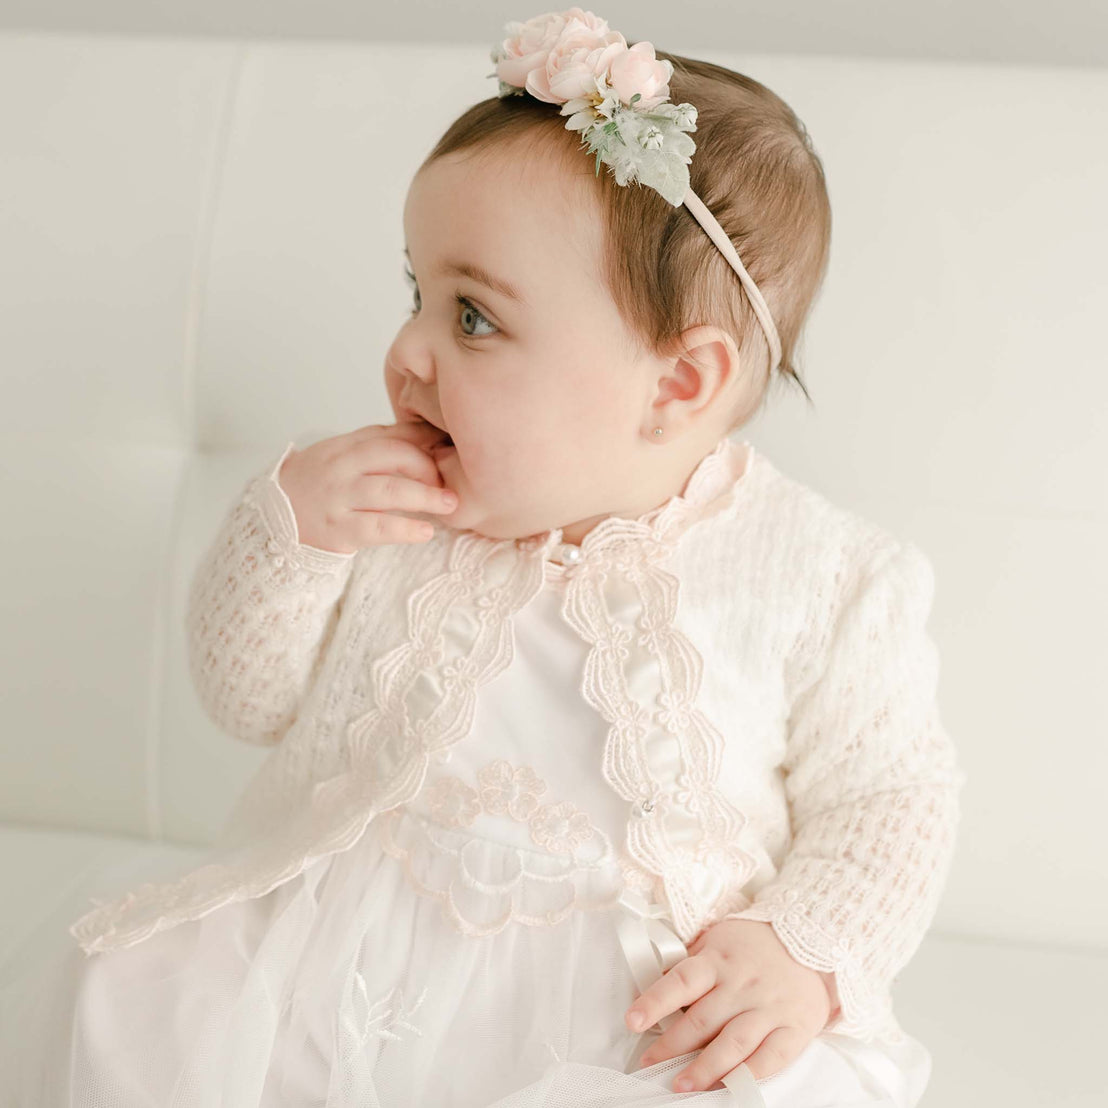 A baby girl in a Joli Knit Sweater & Bonnet, looking to the side with her hand near her mouth, dressed for a baptism against a soft, light background.